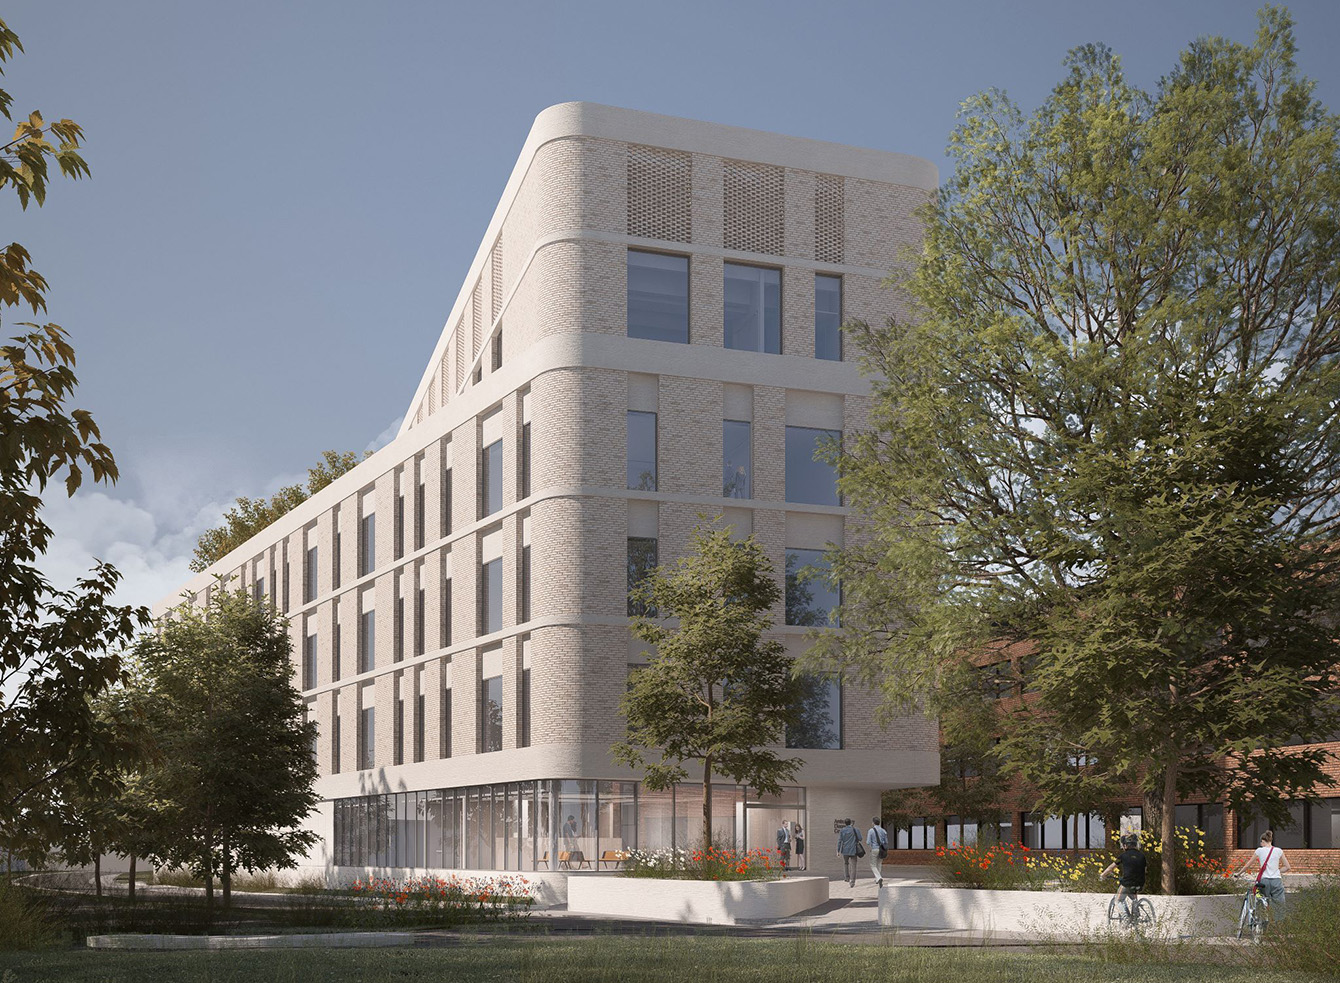 State of the art diagnostic centre approved for planning at West Middlesex University Hospital